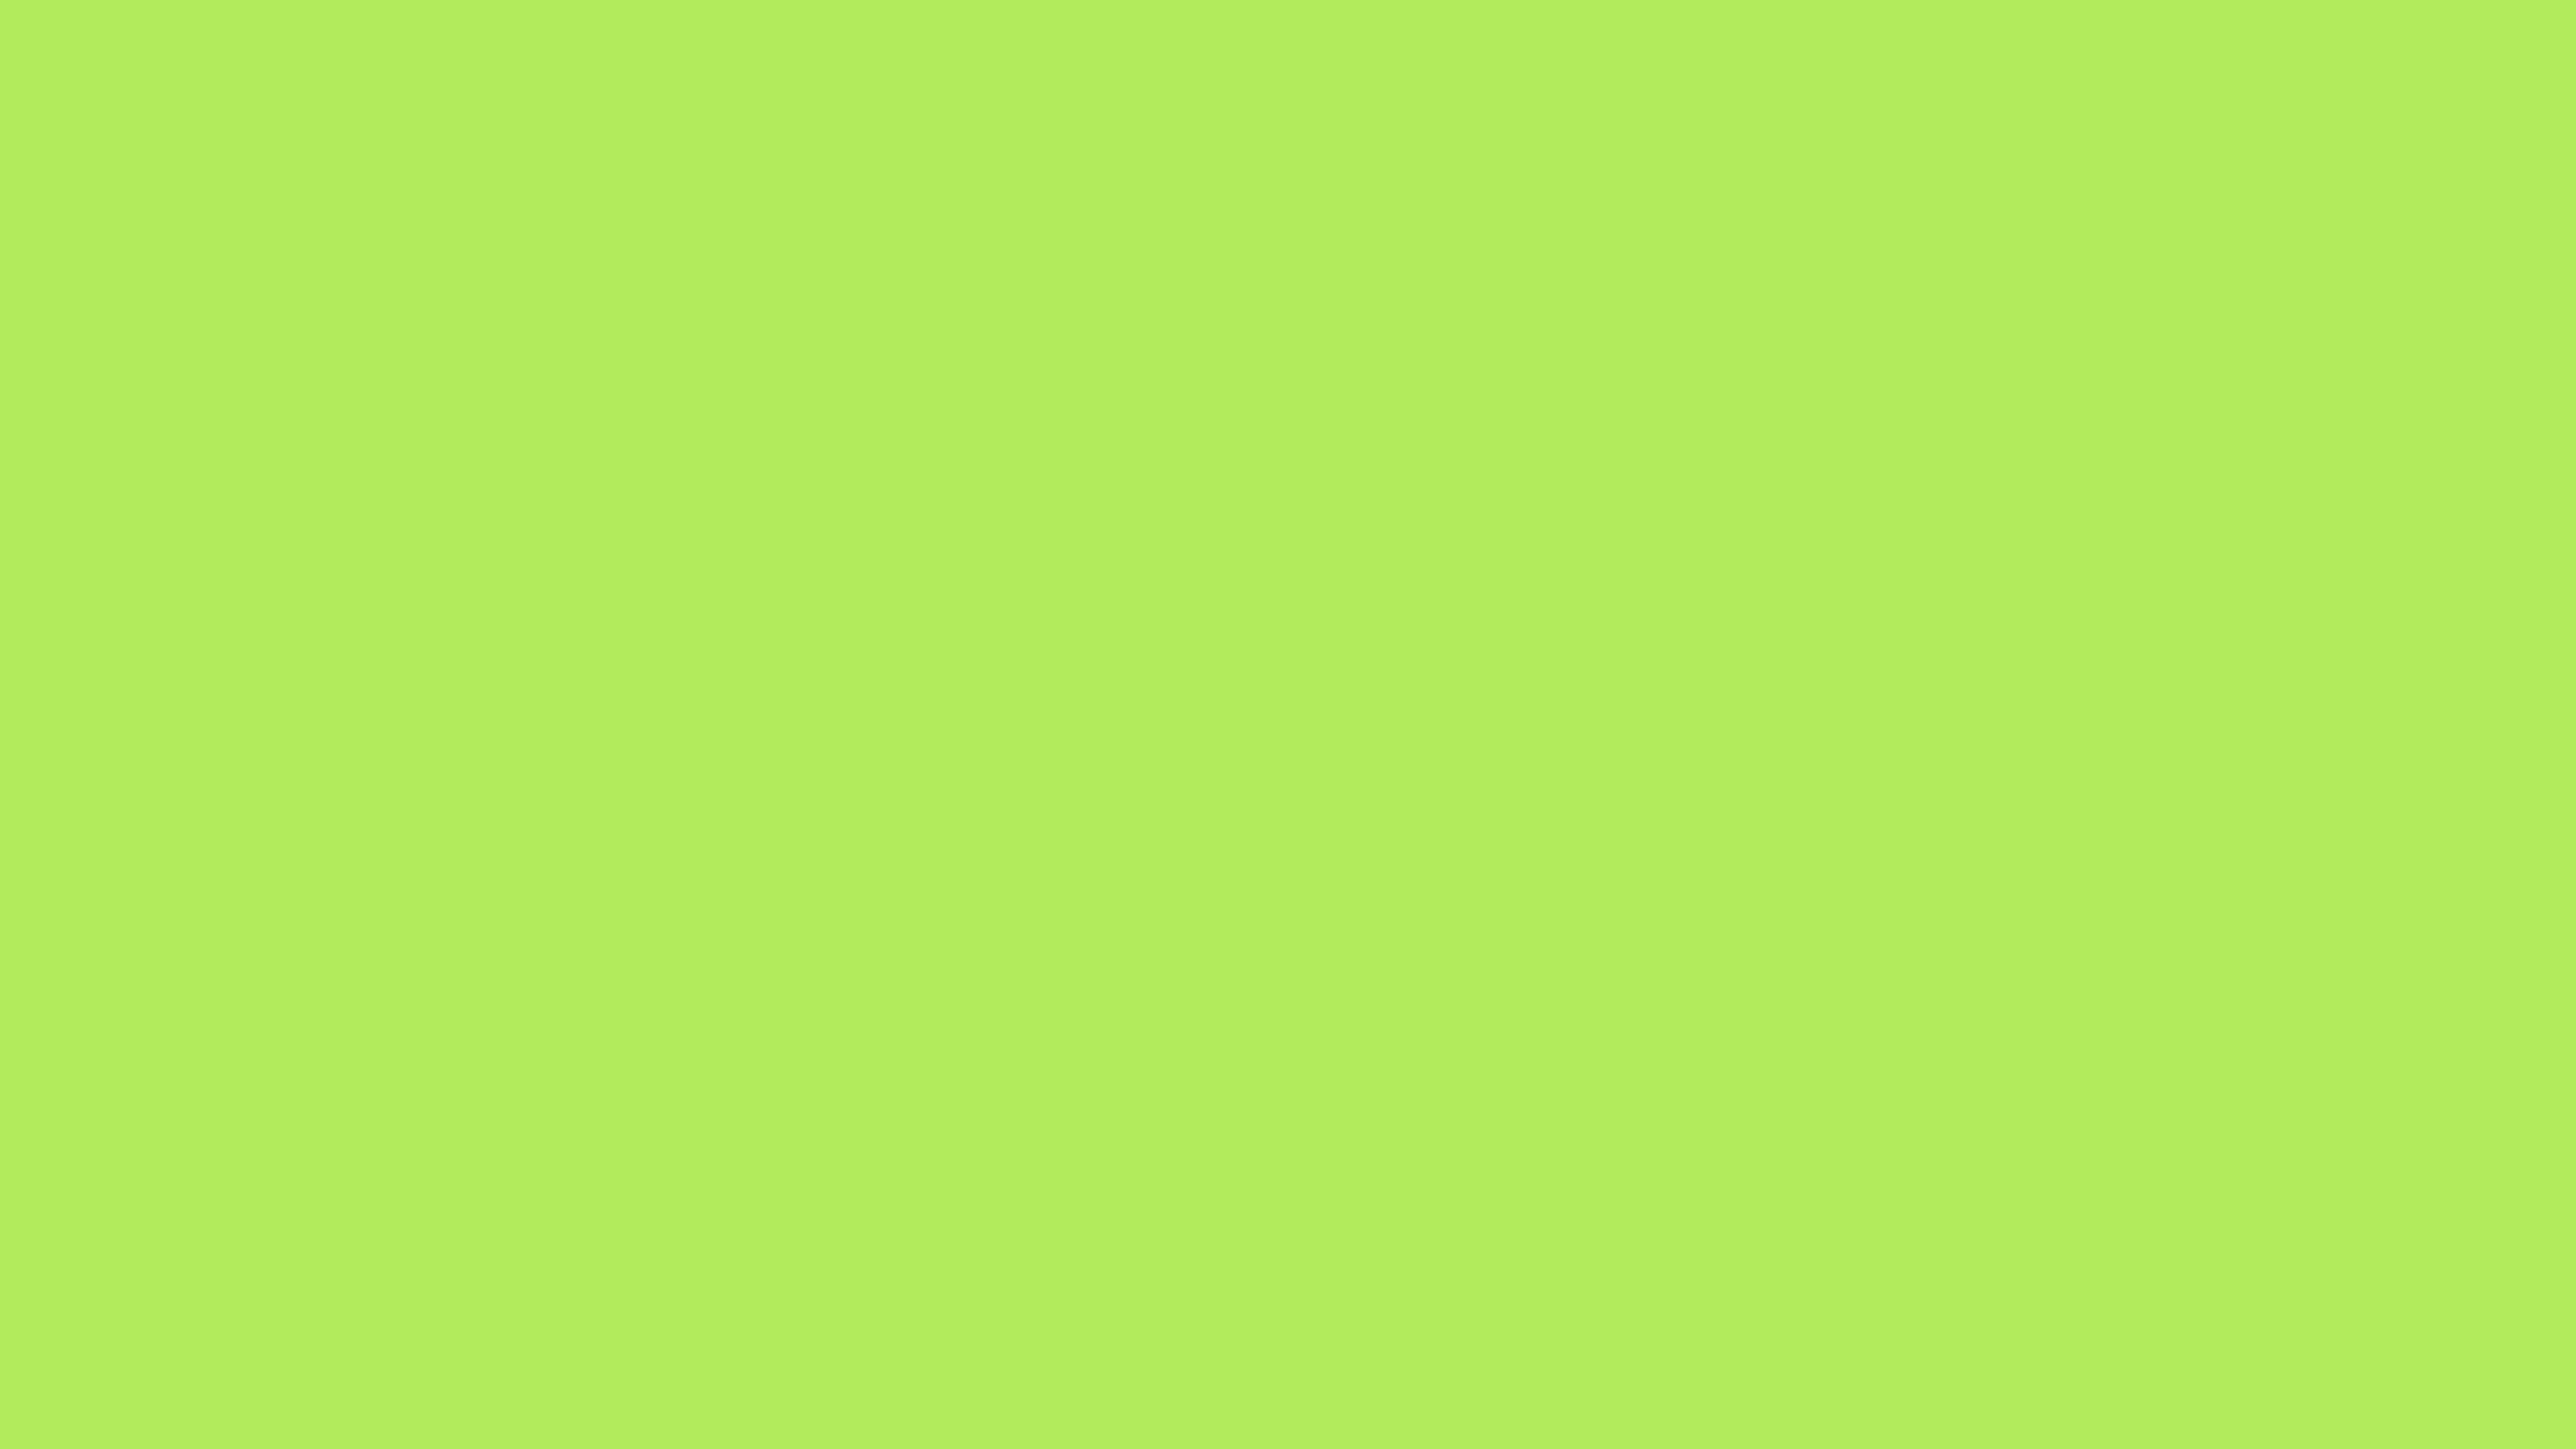 5120x2880 Inchworm Solid Color Background